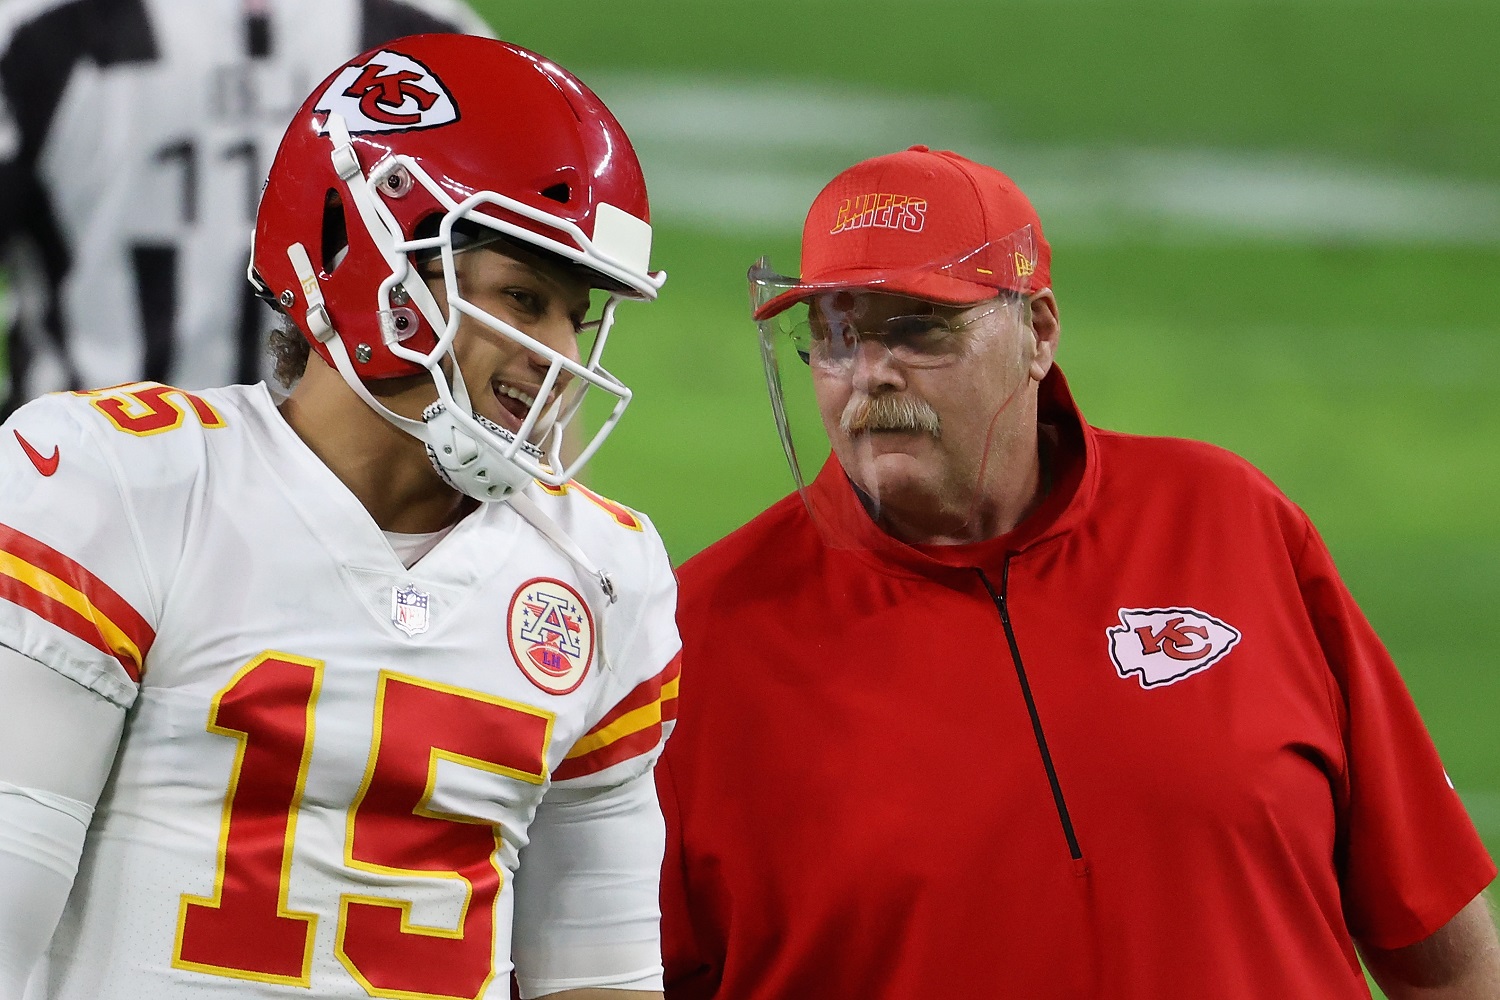 Quarterback Patrick Mahomes of the Kansas City Chiefs talks with head coach Andy Reid before the NFL game against the Las Vegas Raiders on Nov. 22, 2020.